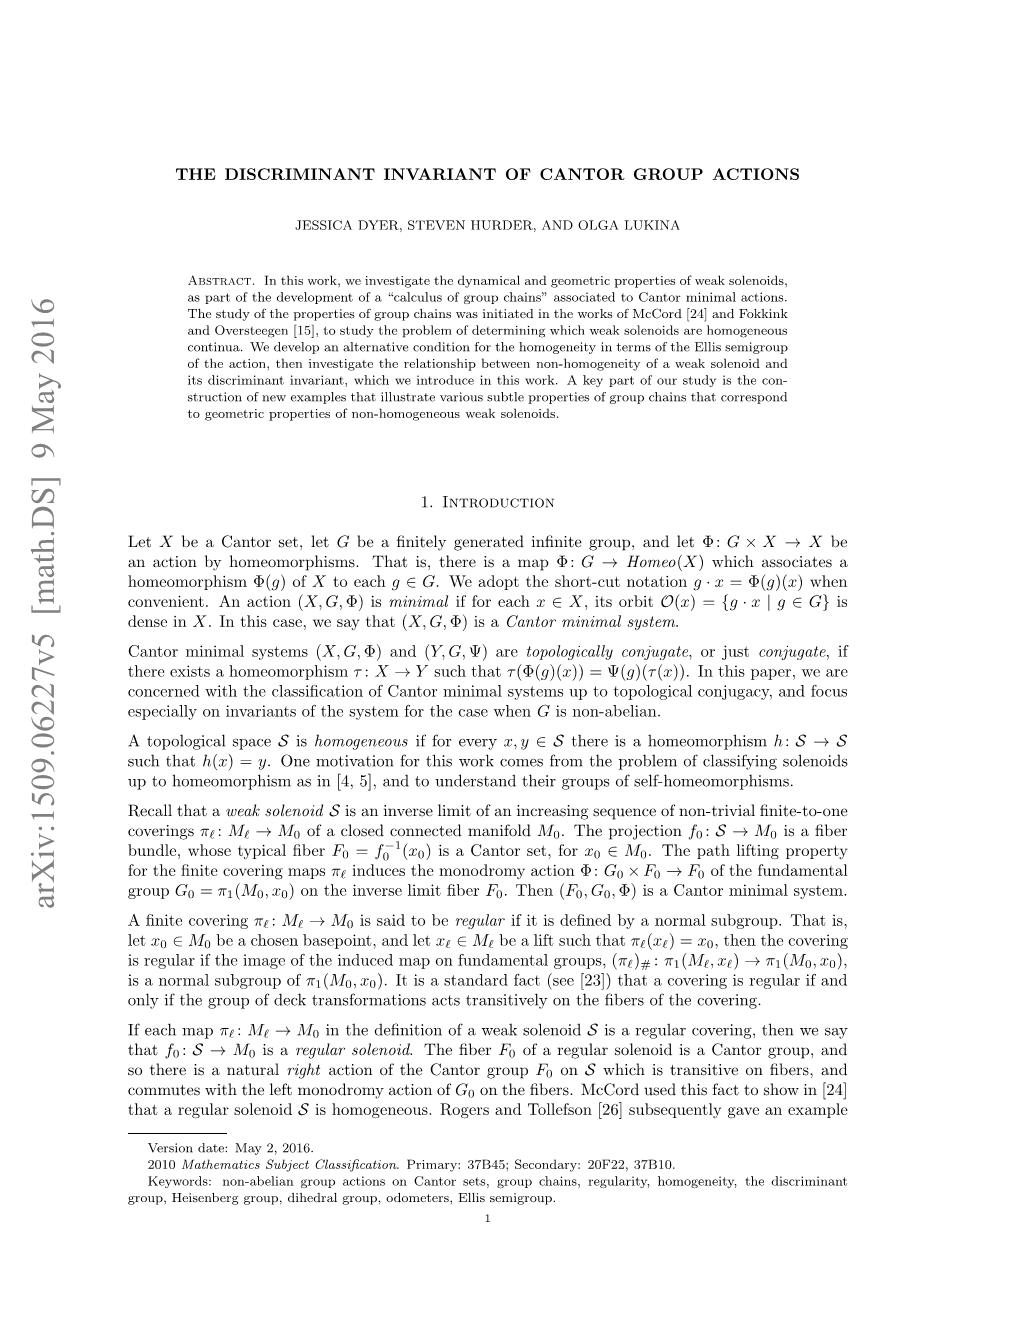 The Discriminant Invariant of Cantor Group Actions 11